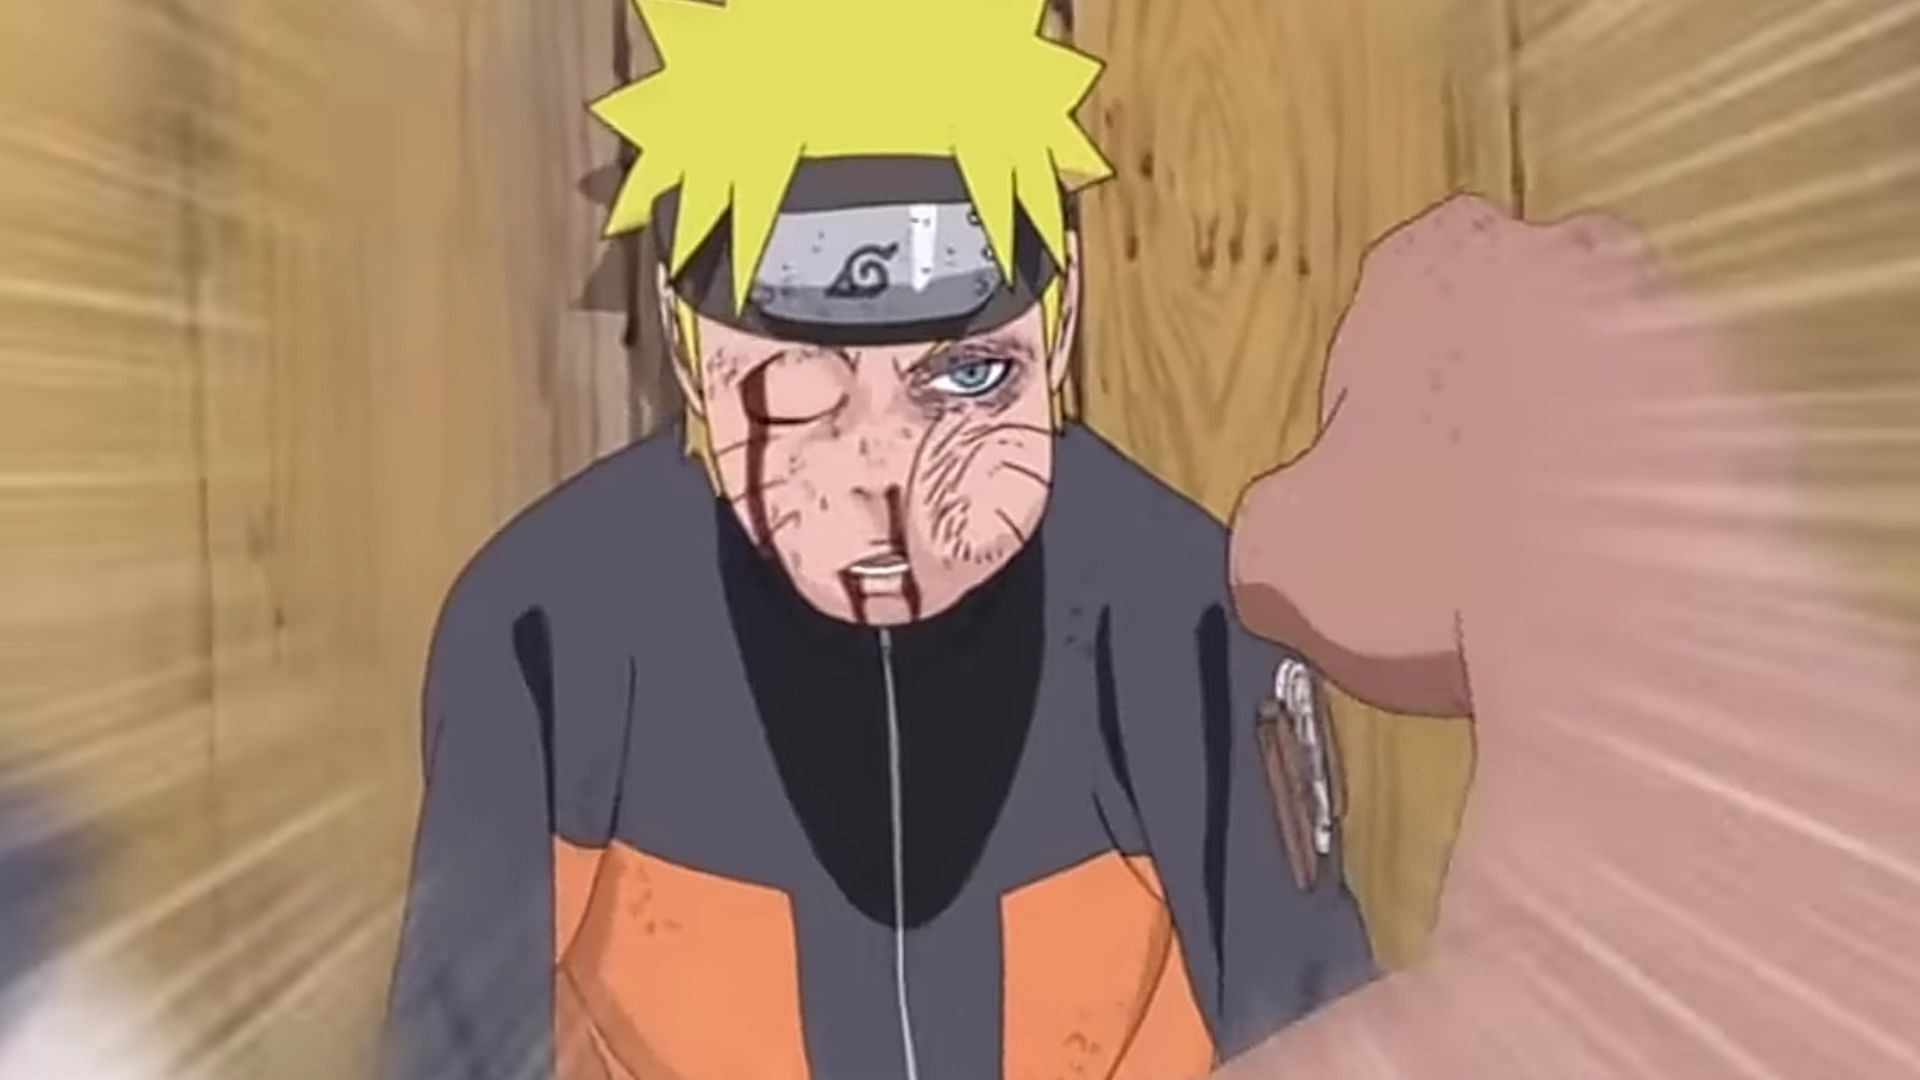 Karui punching a badly bruised Naruto as seen in the anime (image via Pierrot)